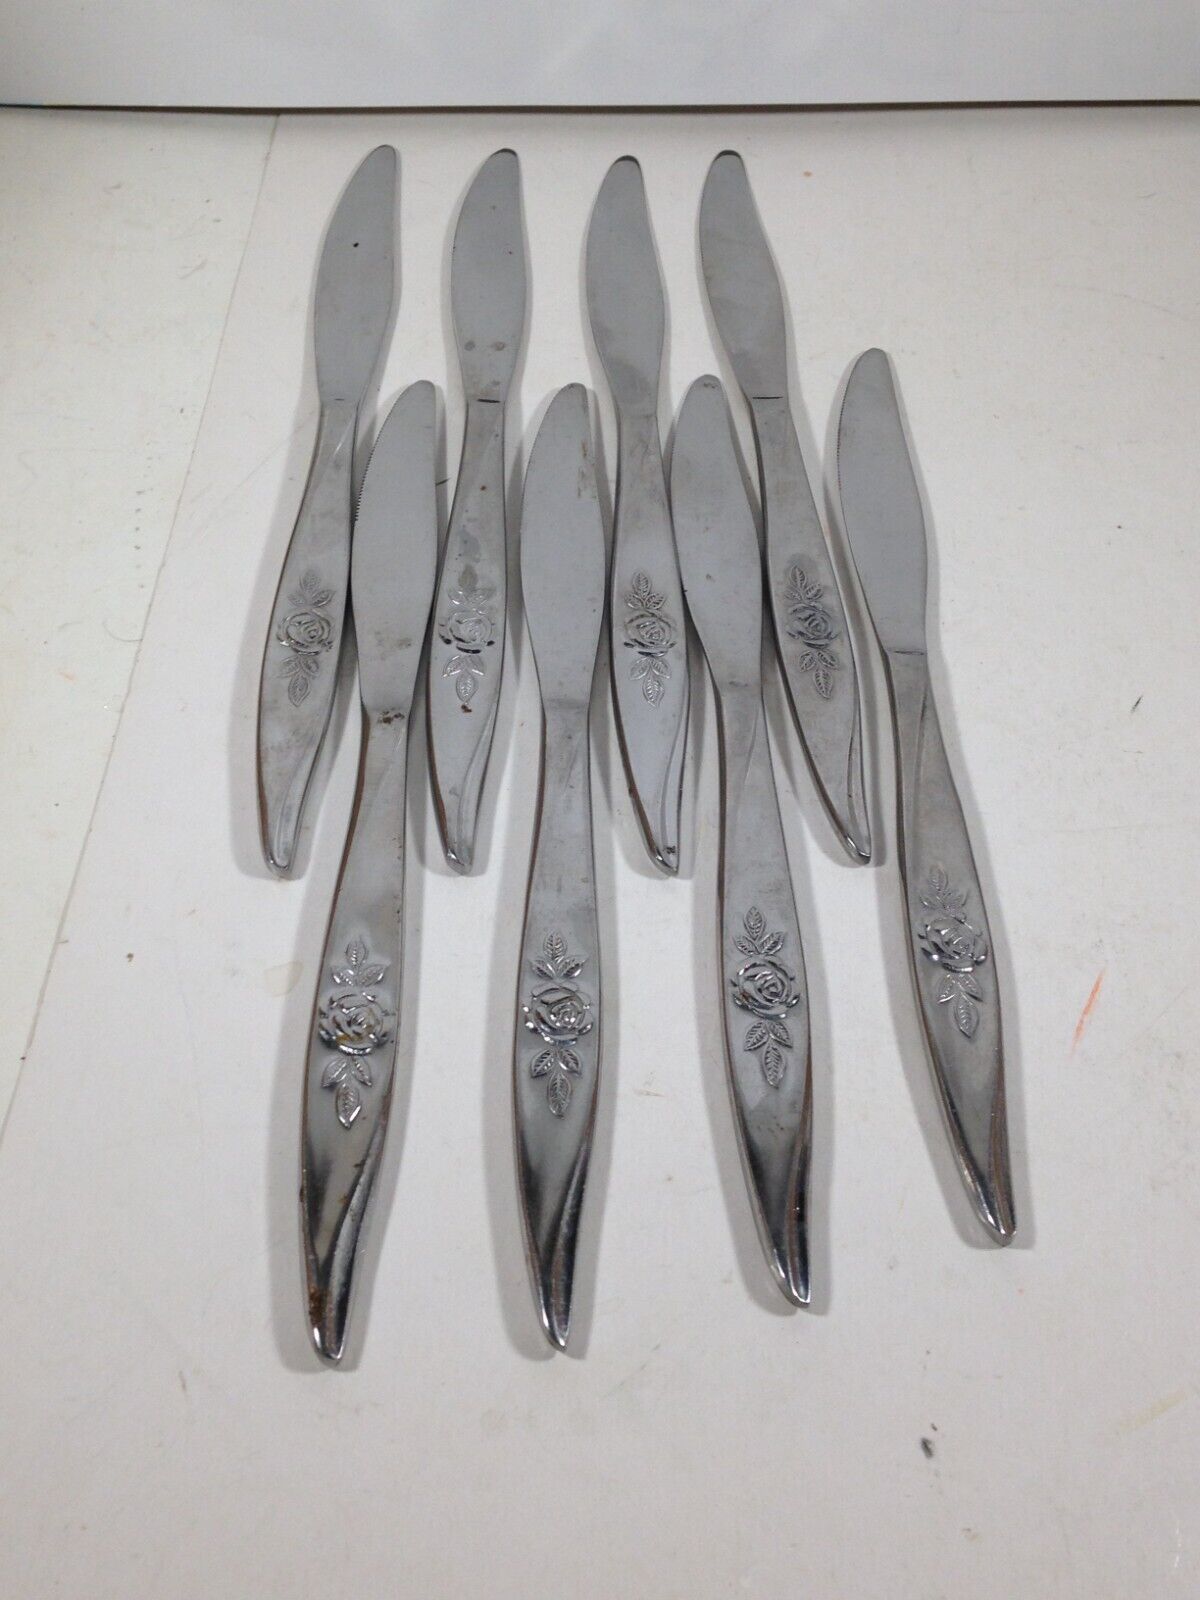 Hanford Forge AVON ROSE Set of 8 Solid Knives Replacements HAFAVR